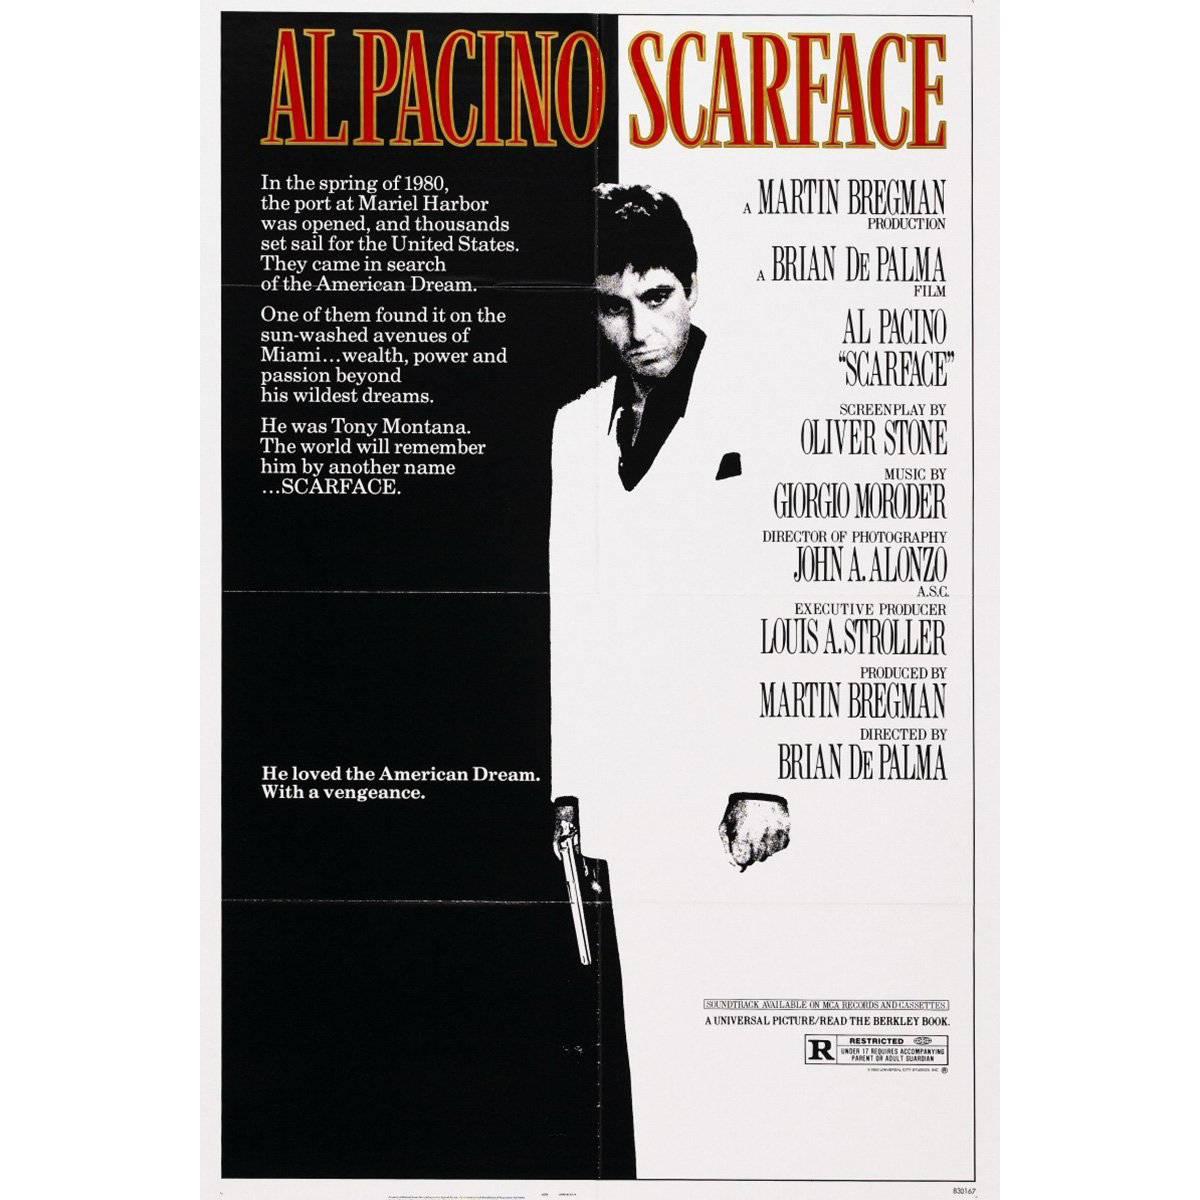 SCARFACE AL PACINO CULT CLASSIC MOVIE POSTER PICTURE PRINT Sizes A5 to A0 *NEW** 